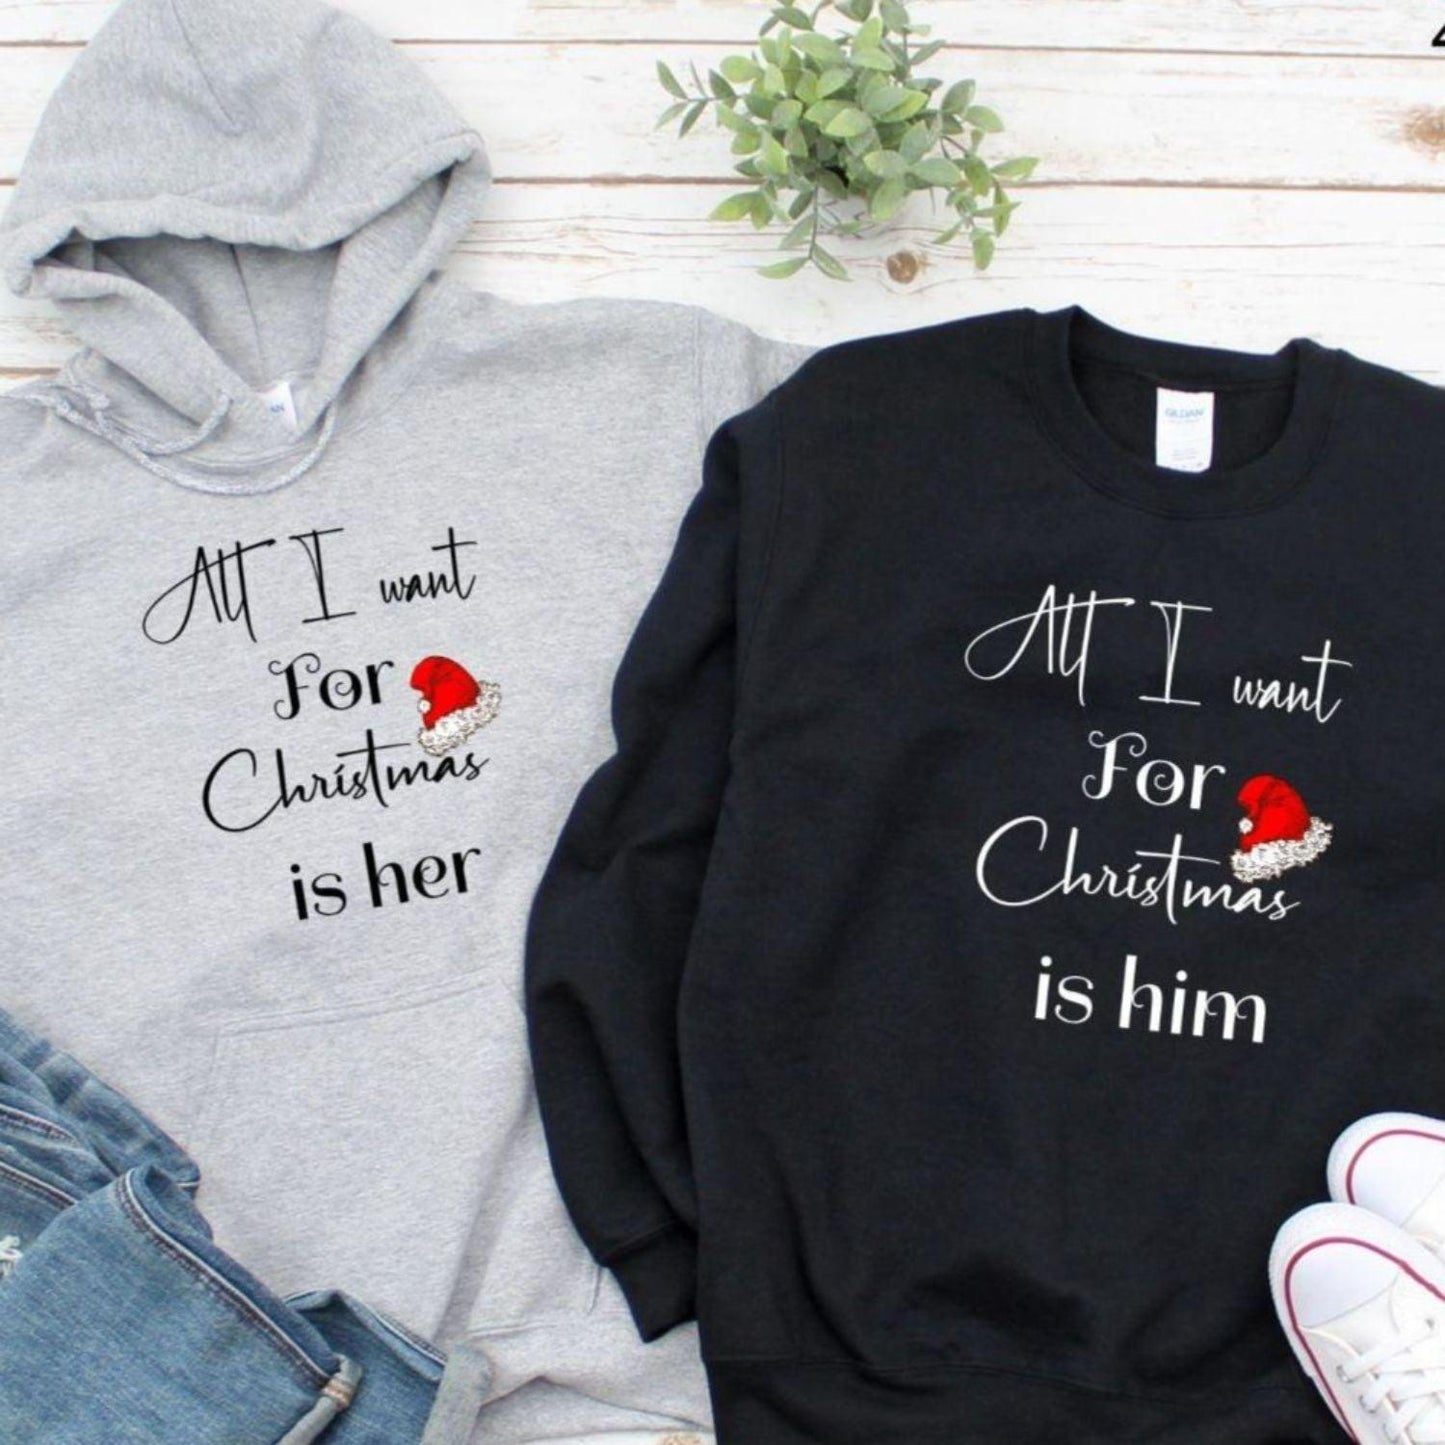 Christmas Matching Set: All I Want for Christmas is Him/Her - Perfect Festive Outfits - 4Lovebirds